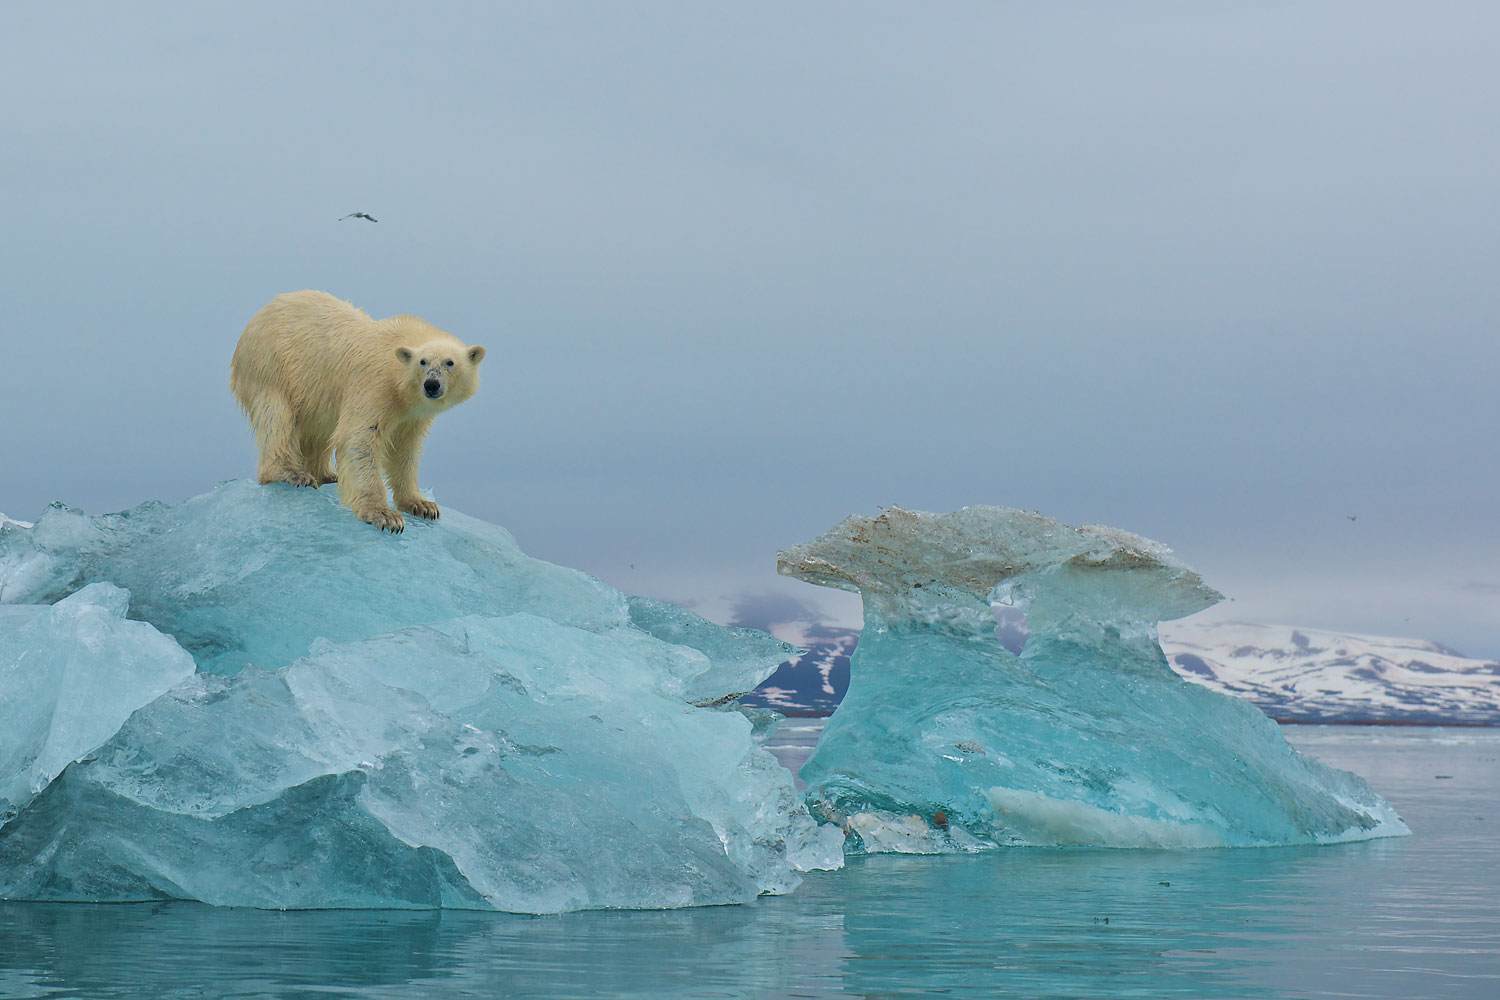 A polar bear scans the surrounding area for seals from the top of a large piece of glacial ice in Liefdefjorden, Svalbard in 2011.